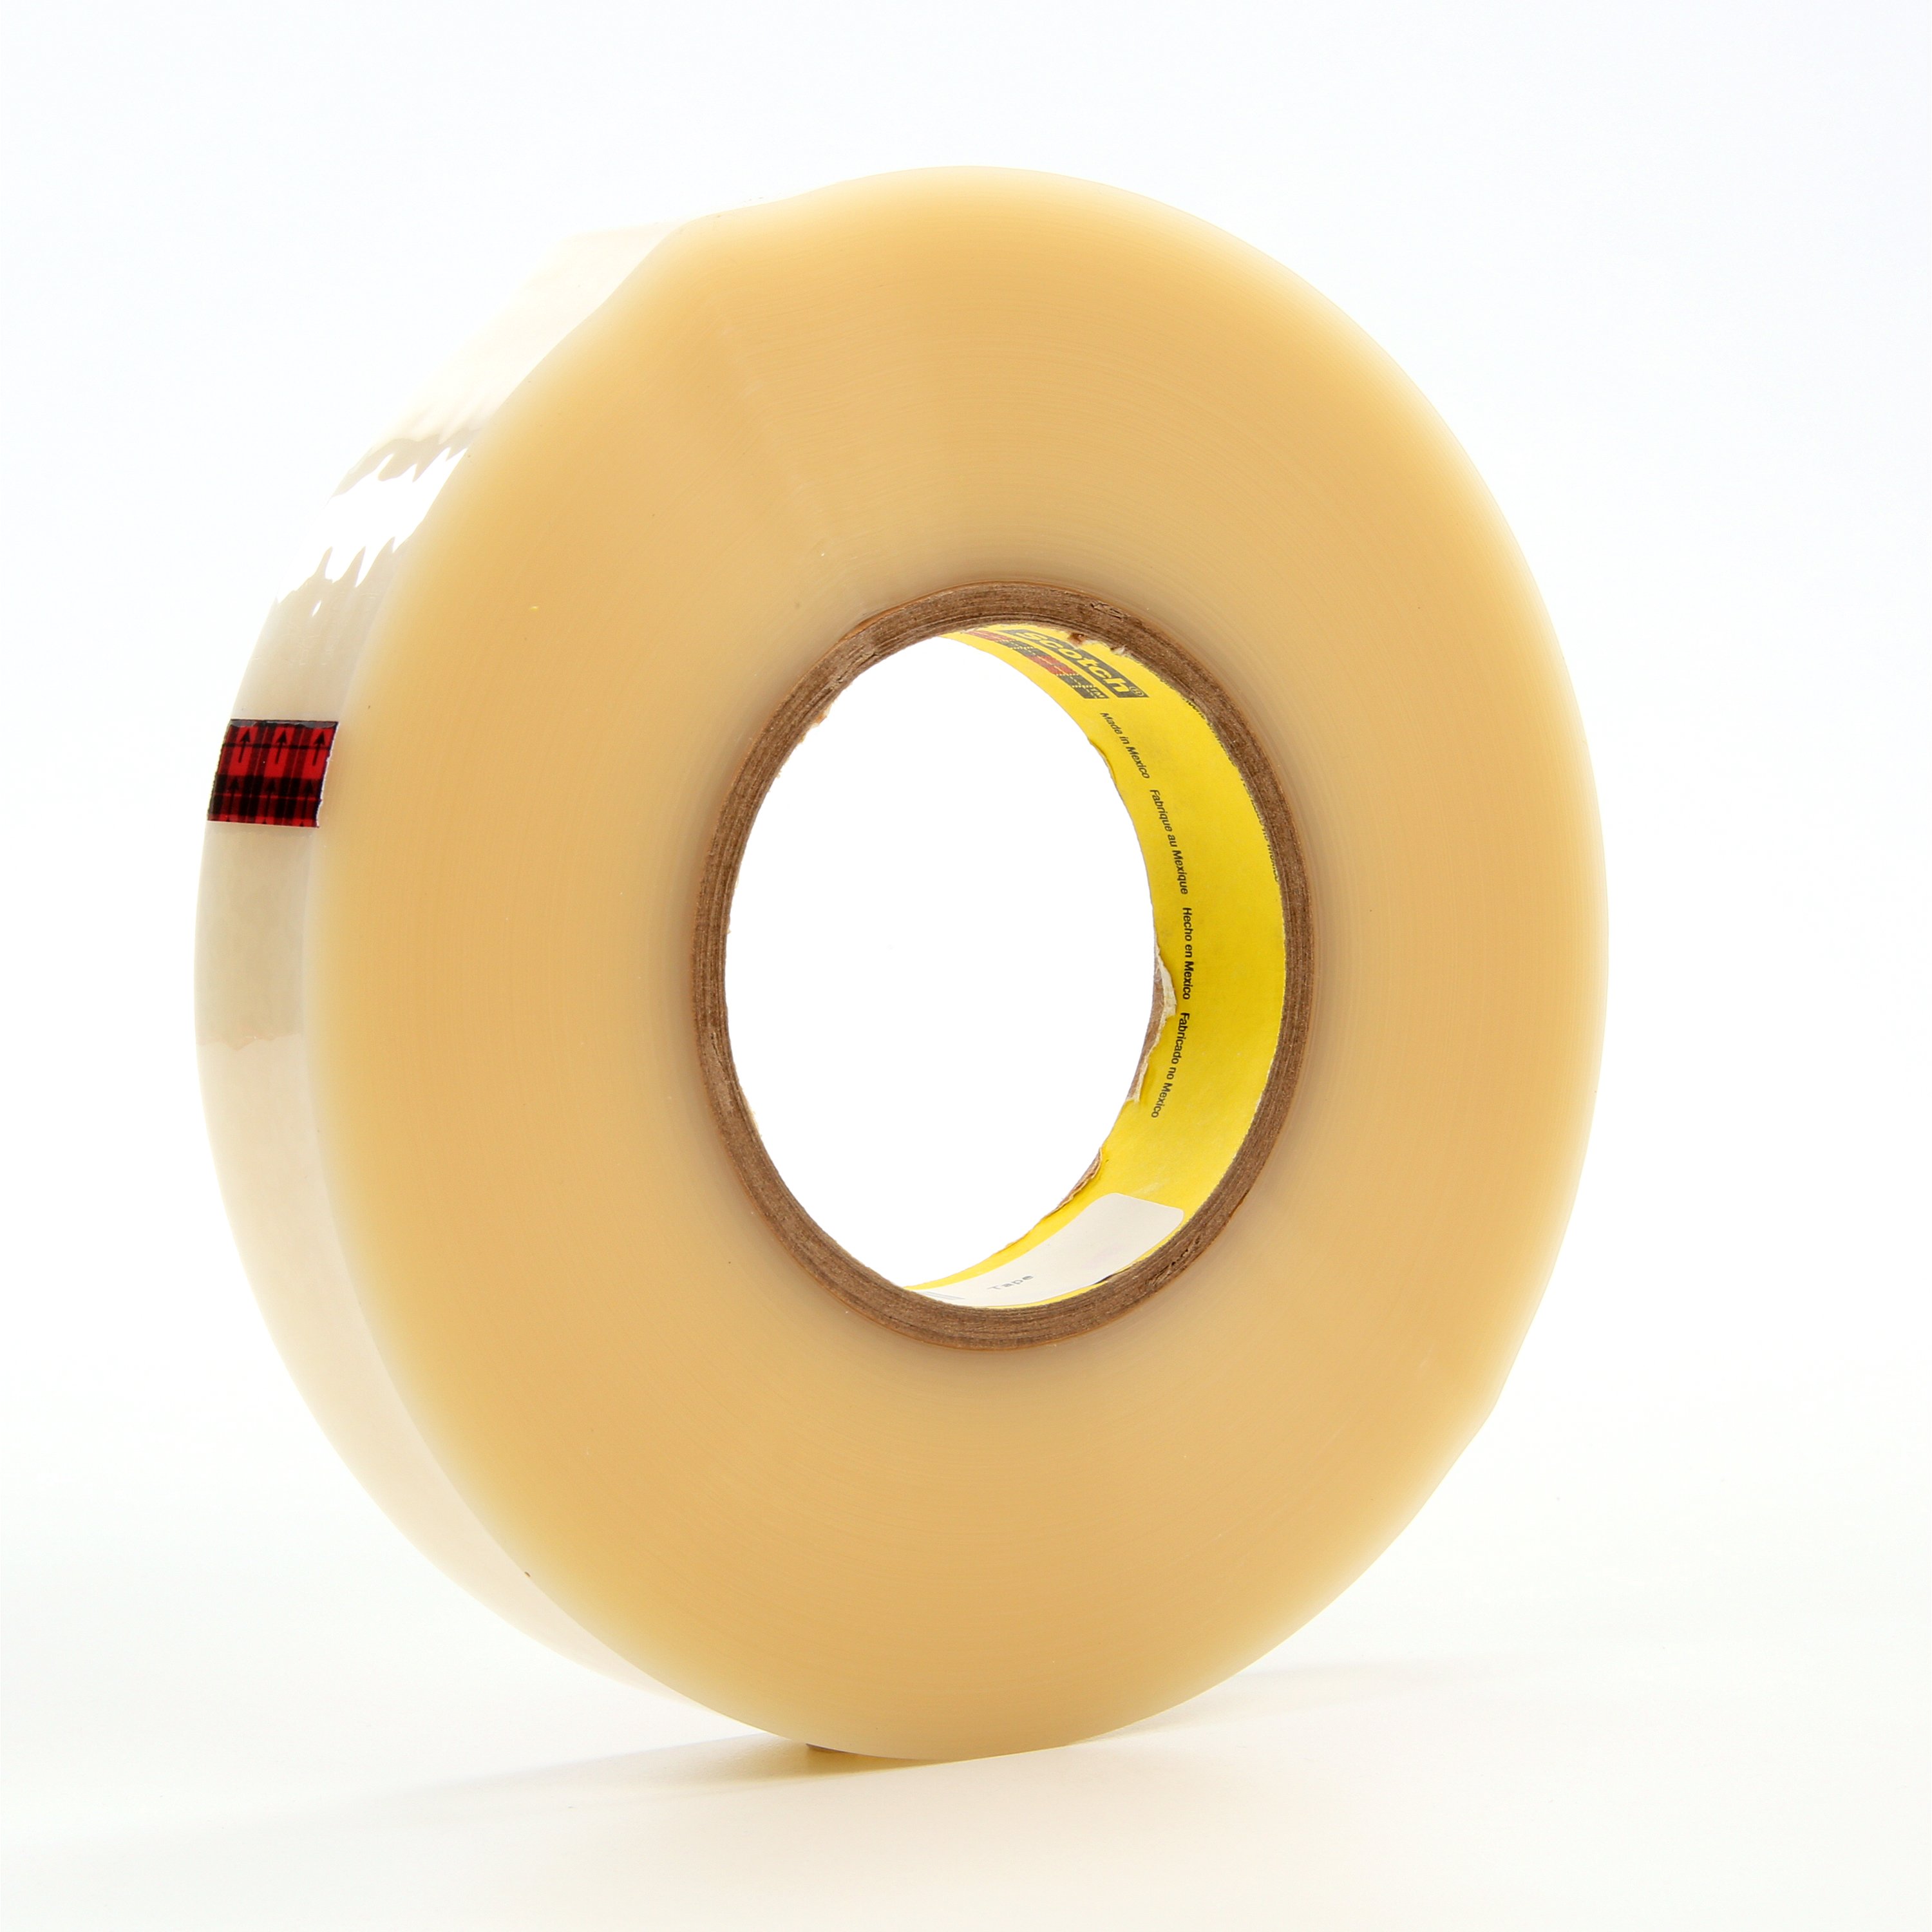 3M™ Polyester Film Tape 853 is a transparent polyester film tape with solvent resistant acrylic adhesive.